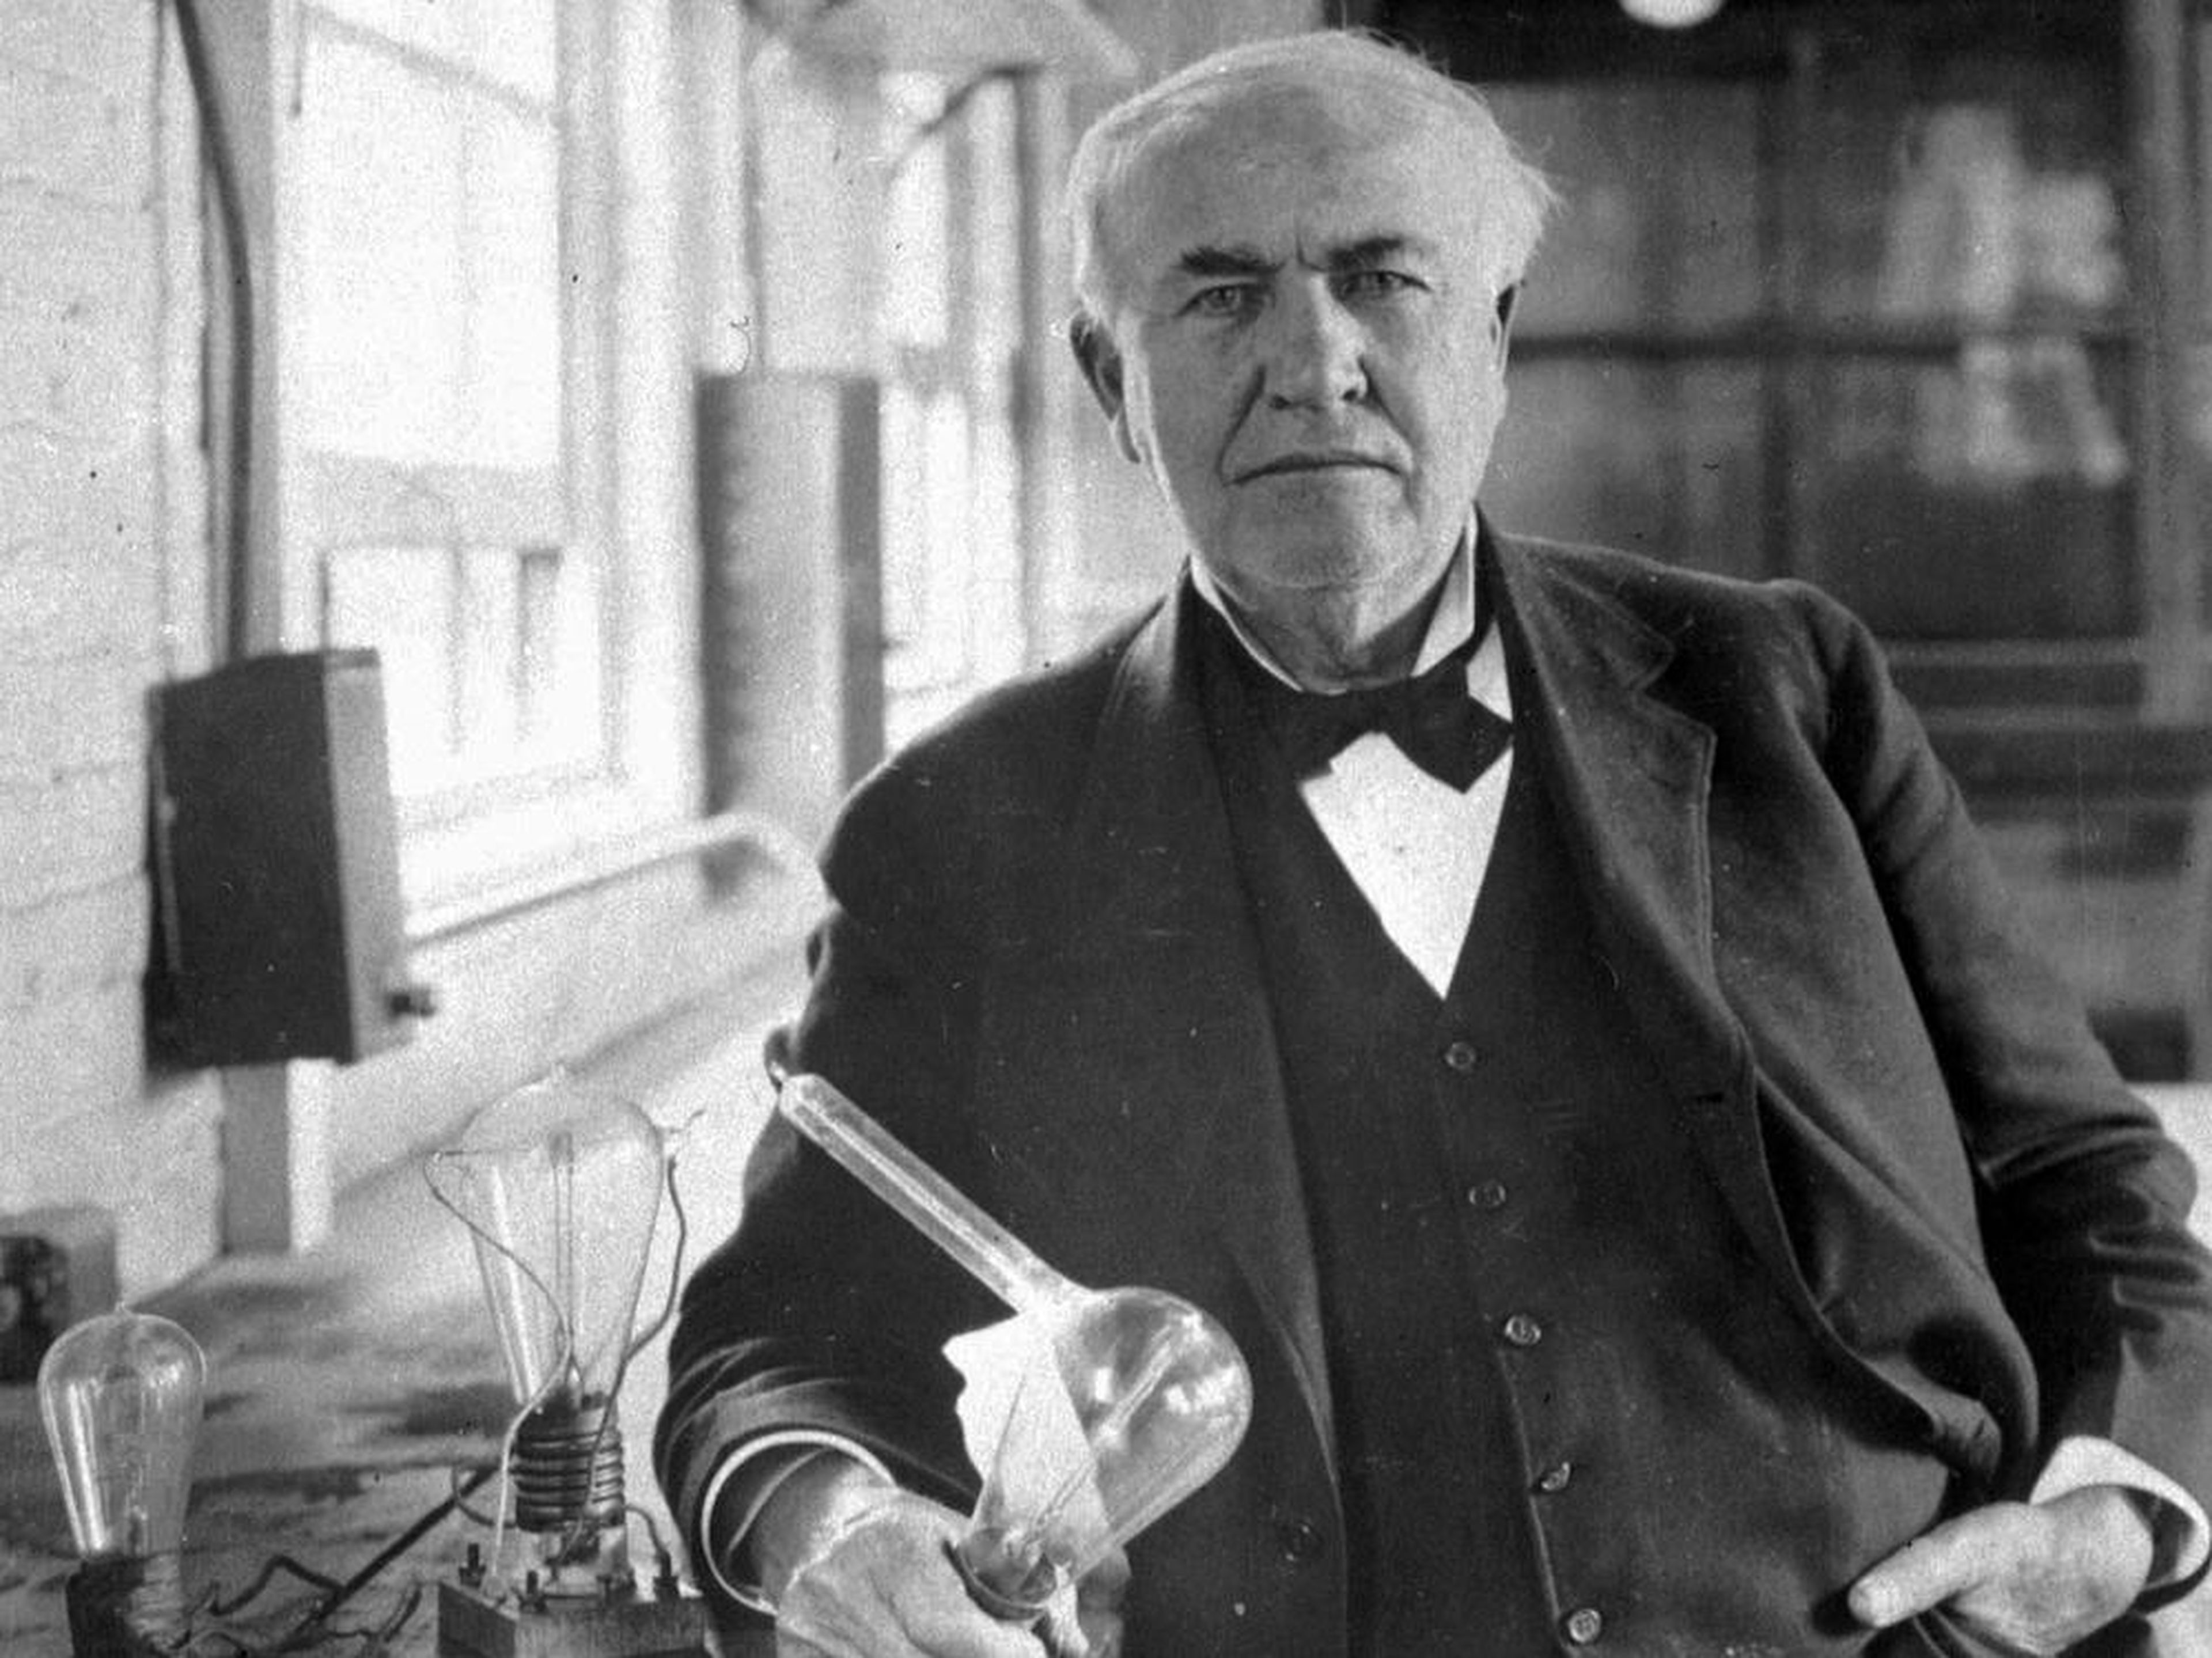 Thomas Edison was considered a difficult child at the public school he attended in Port Huron, MI, so at the age of seven, his mother — an accomplished school teacher — took him out of school and taught him at home.